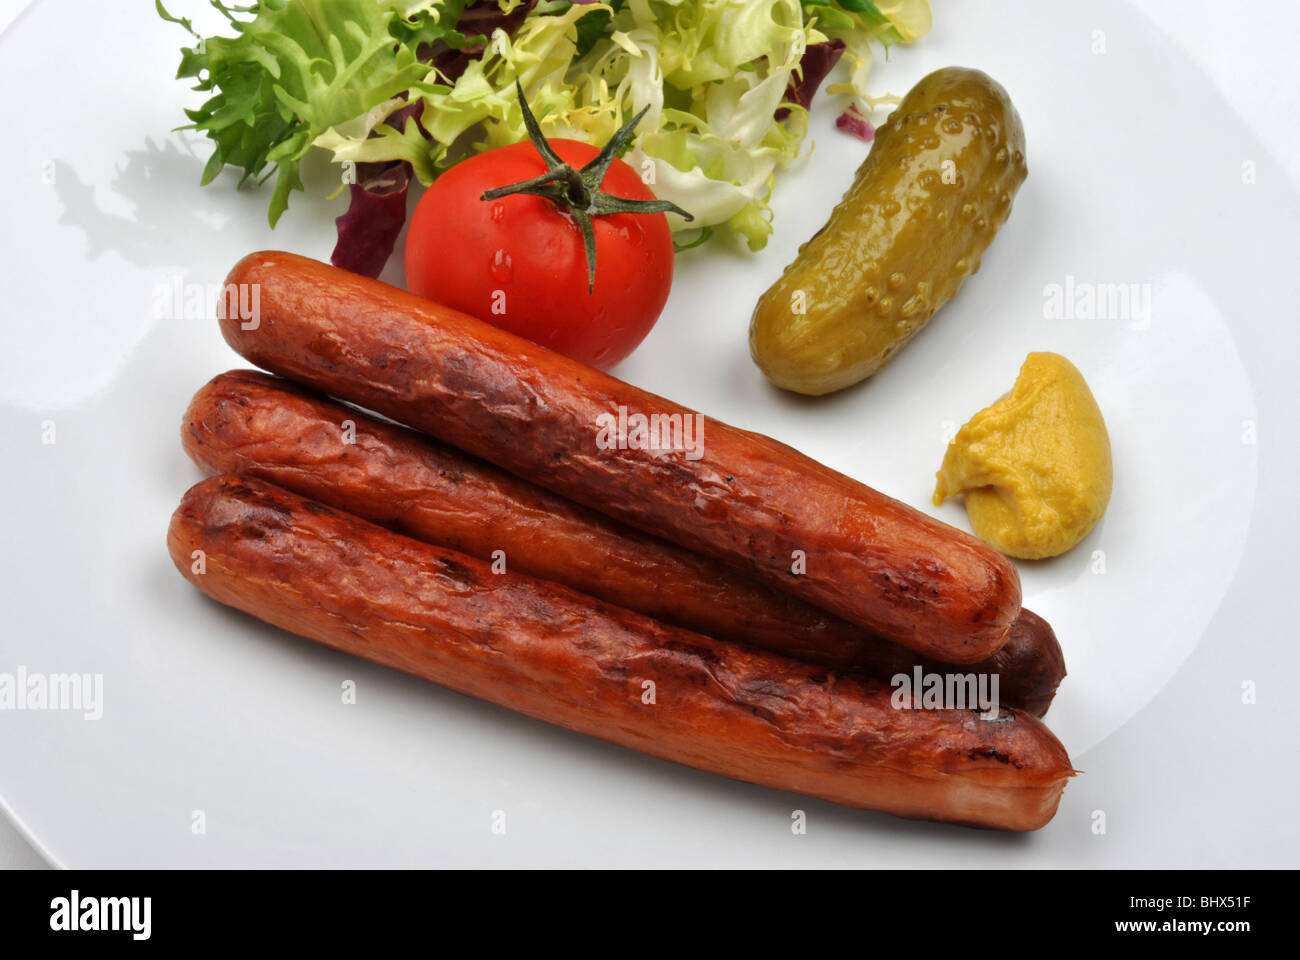 smoked sausage and organic gherkin on a plate Stock Photo